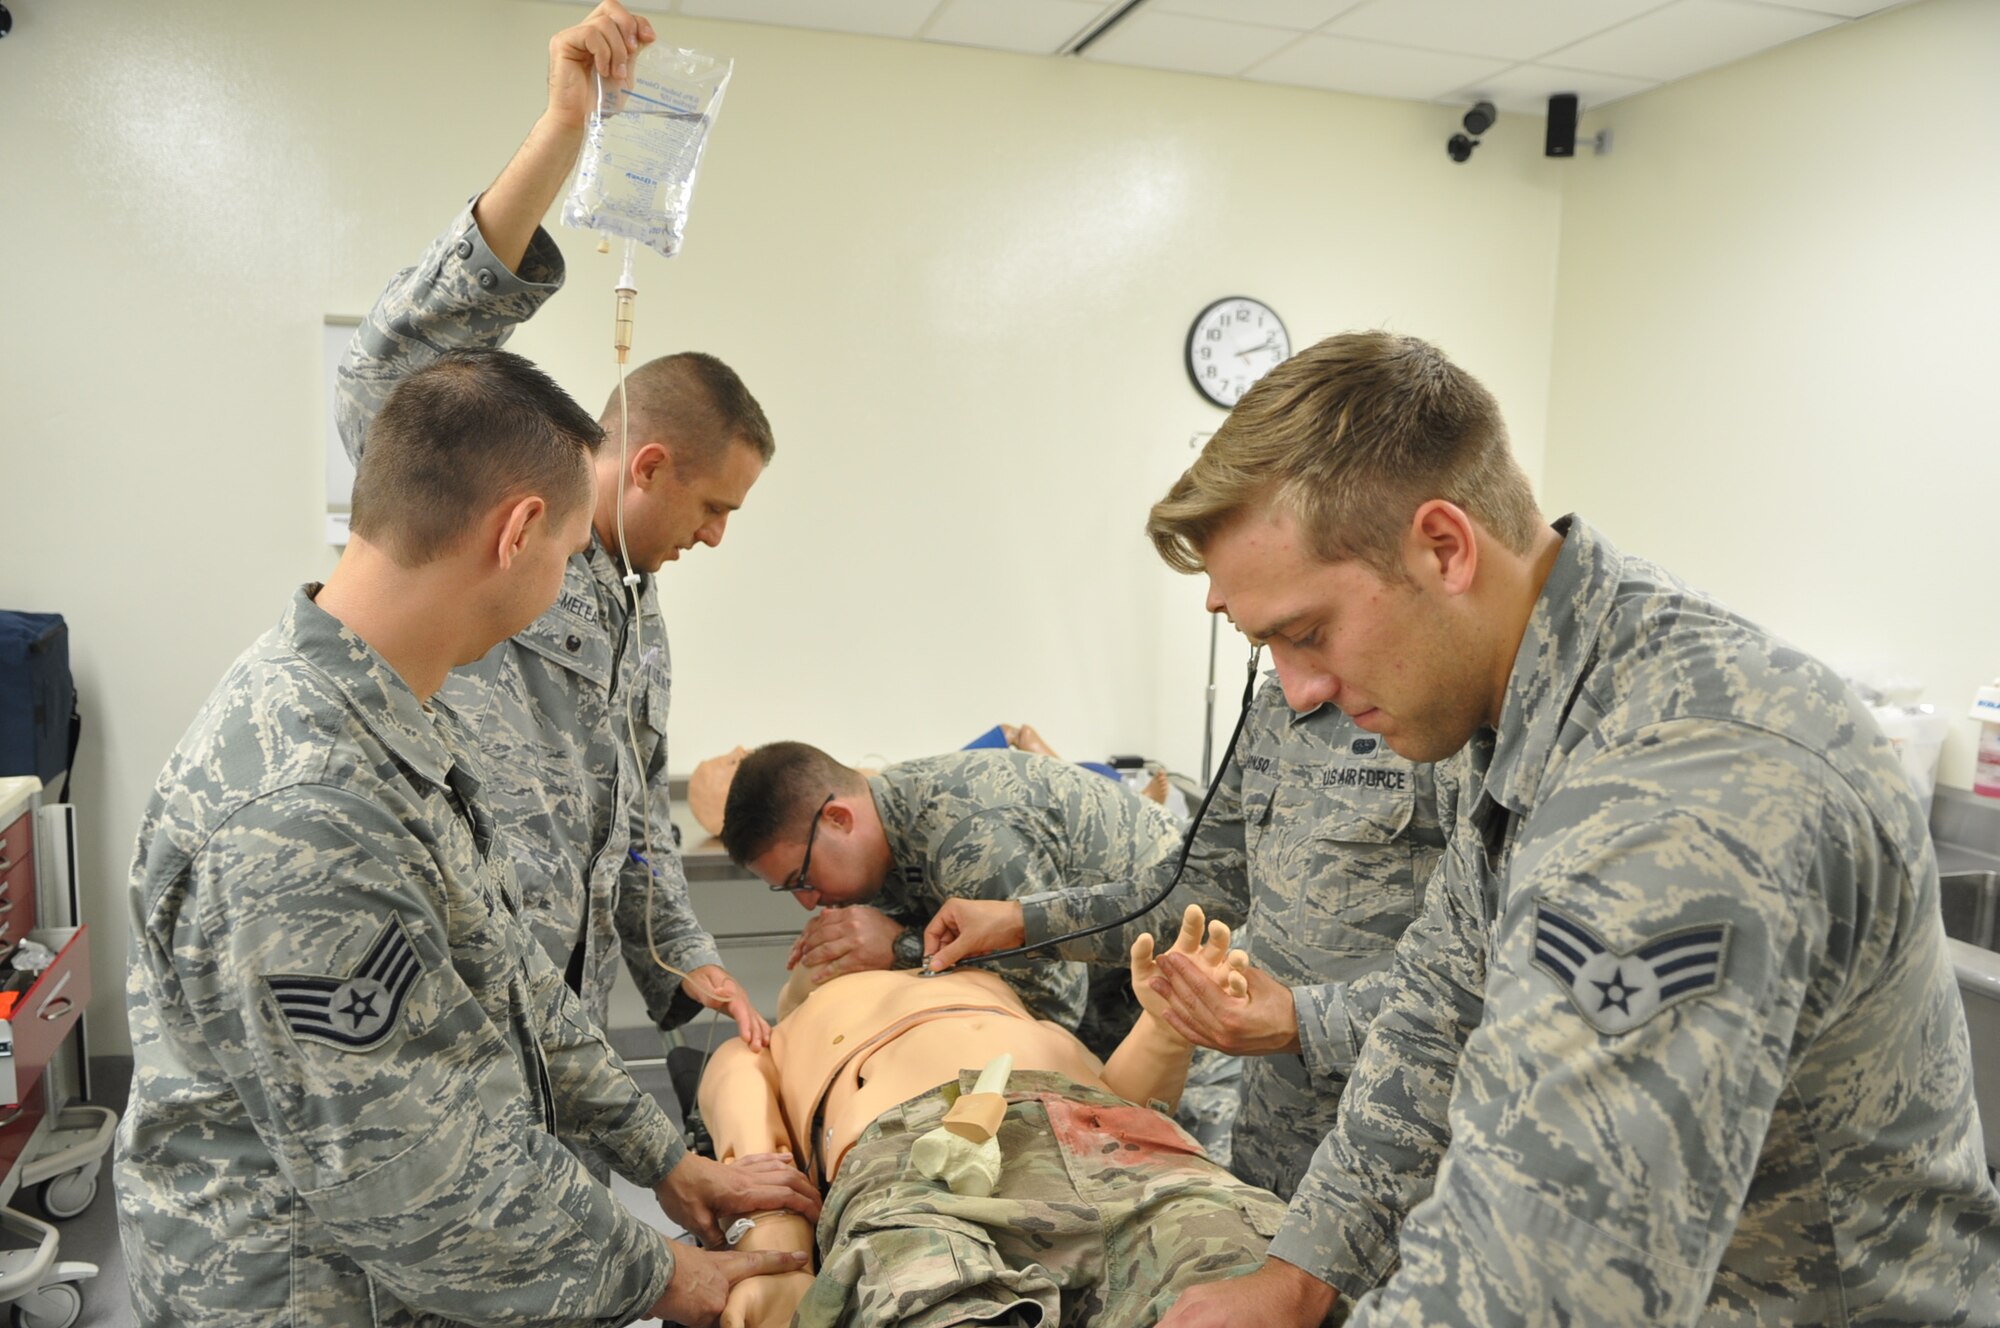 Airmen from Emerge Moody experience what different career fields do in the 23d Medical Group, Nov. 3, 2016 at Moody Air Force Base, Ga. Emerge Moody is a deliberate leadership development program geared towards giving junior enlisted and officers an opportunity to better understand Air Force mission sets. (Courtesy Photo)